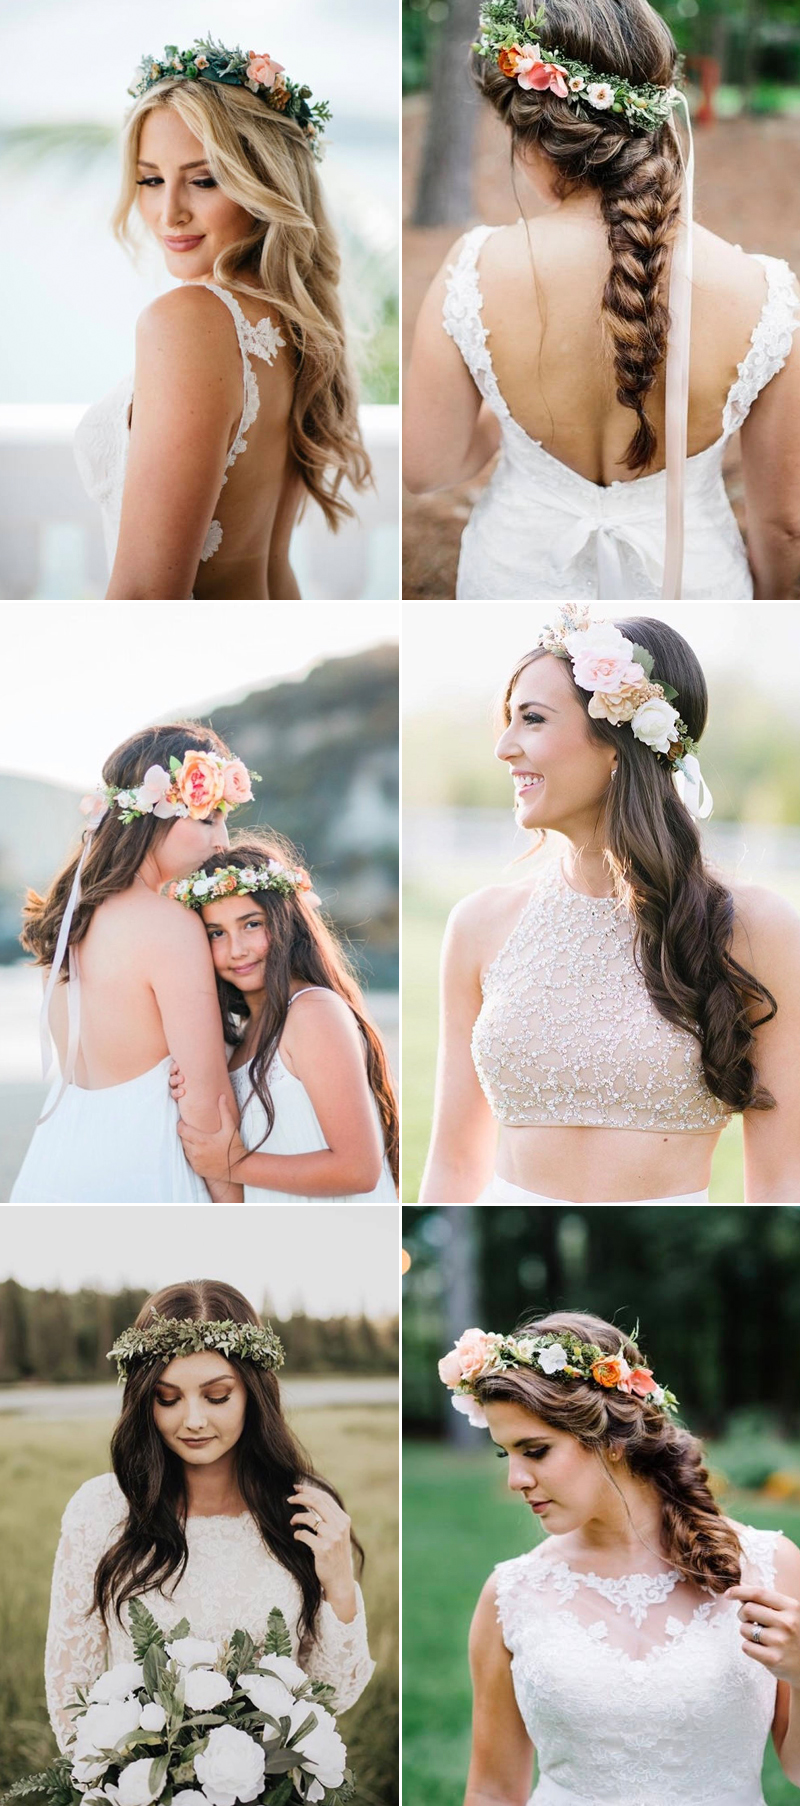 Bridal Hair Trends - Deconstructed Flower Crowns - The Wedding Community